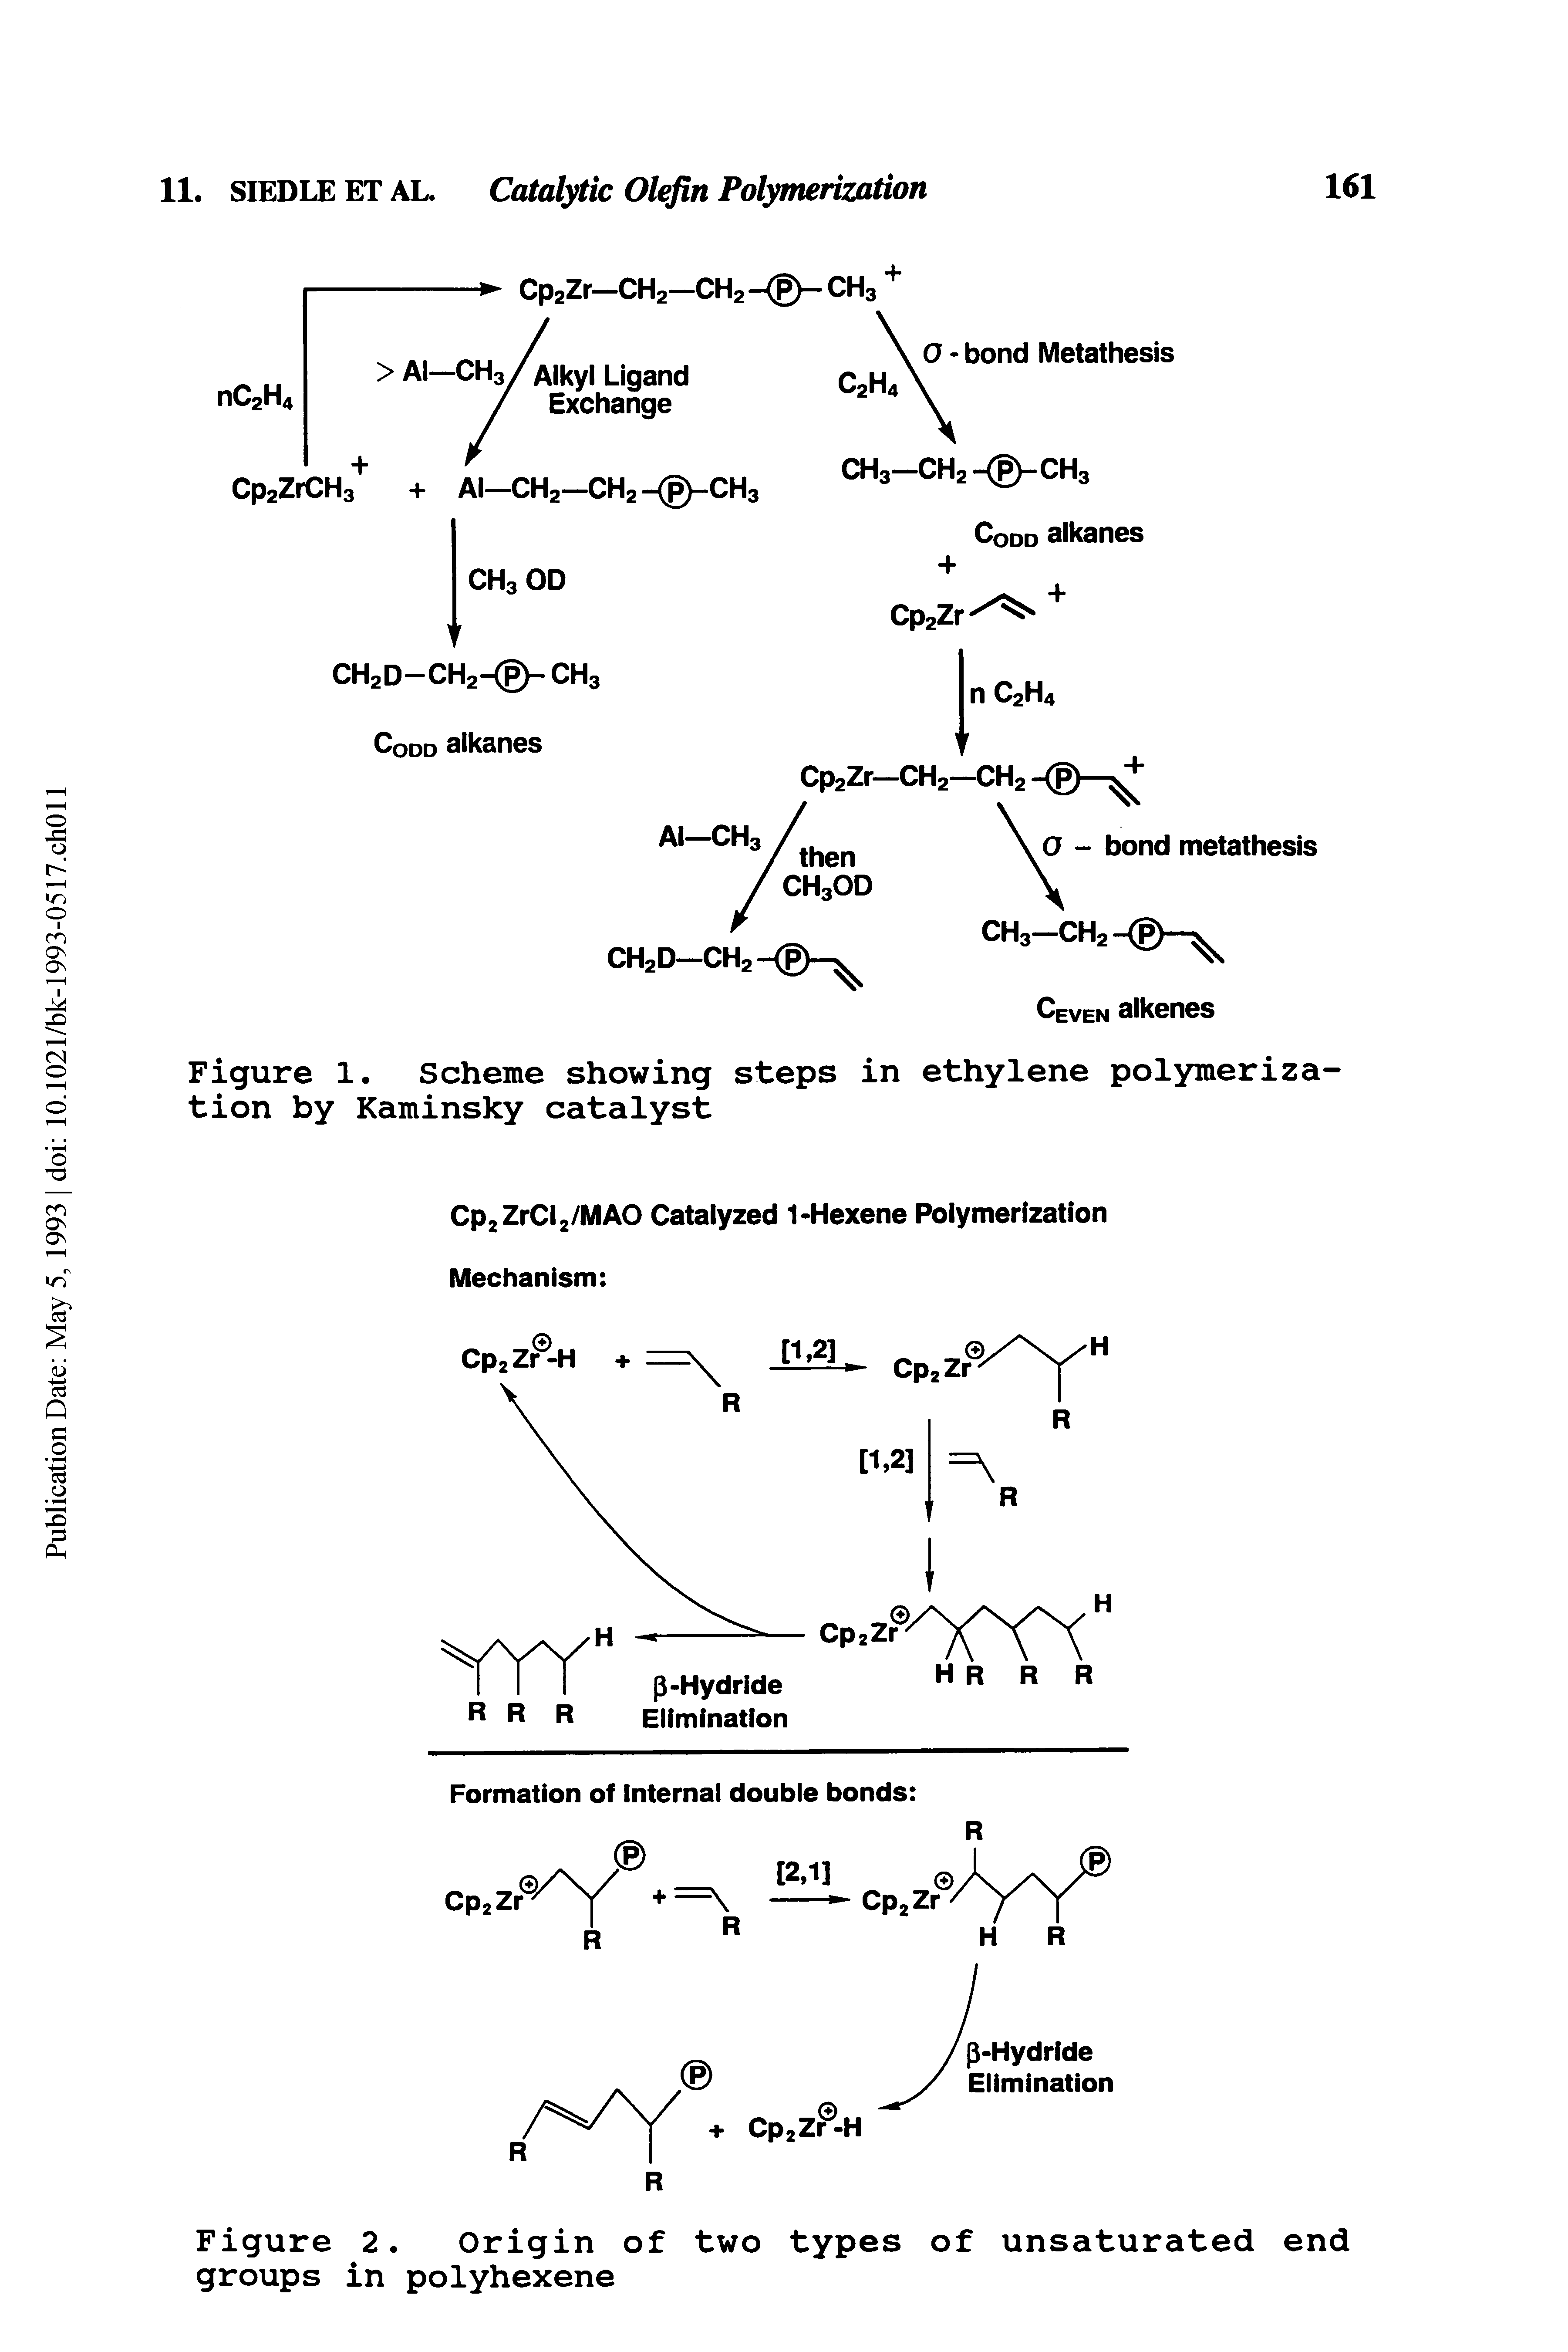 Figure 2. Origin of two types of unsaturated end groups in polyhexene...